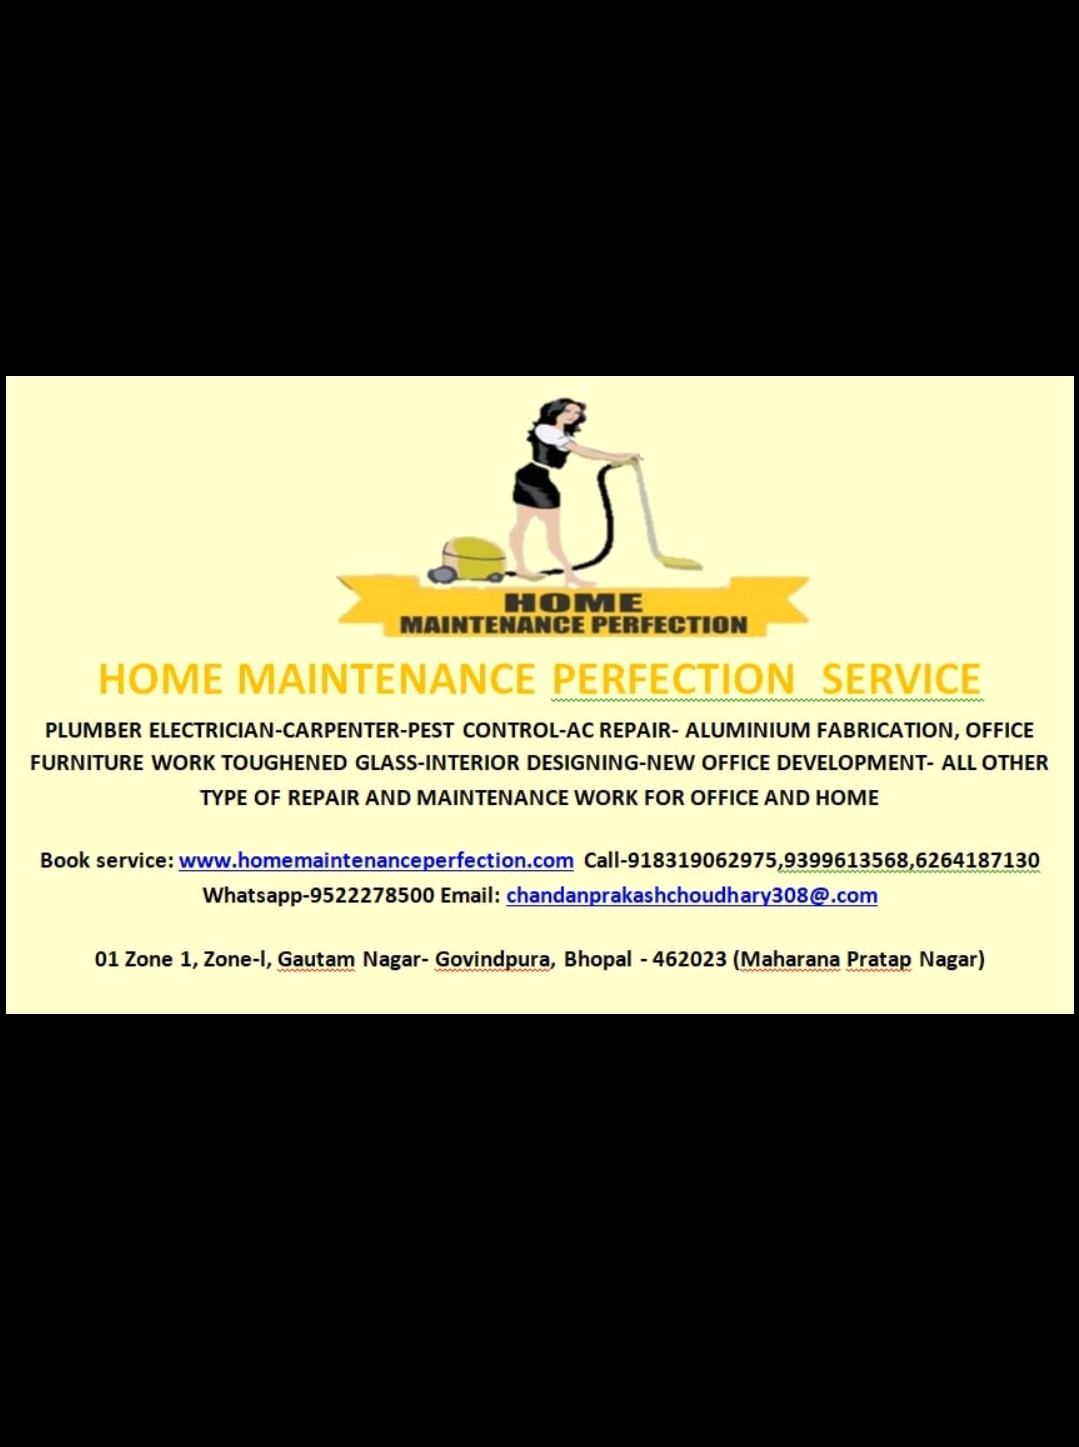 Home Maintenance Perfection Service in Bhopal 